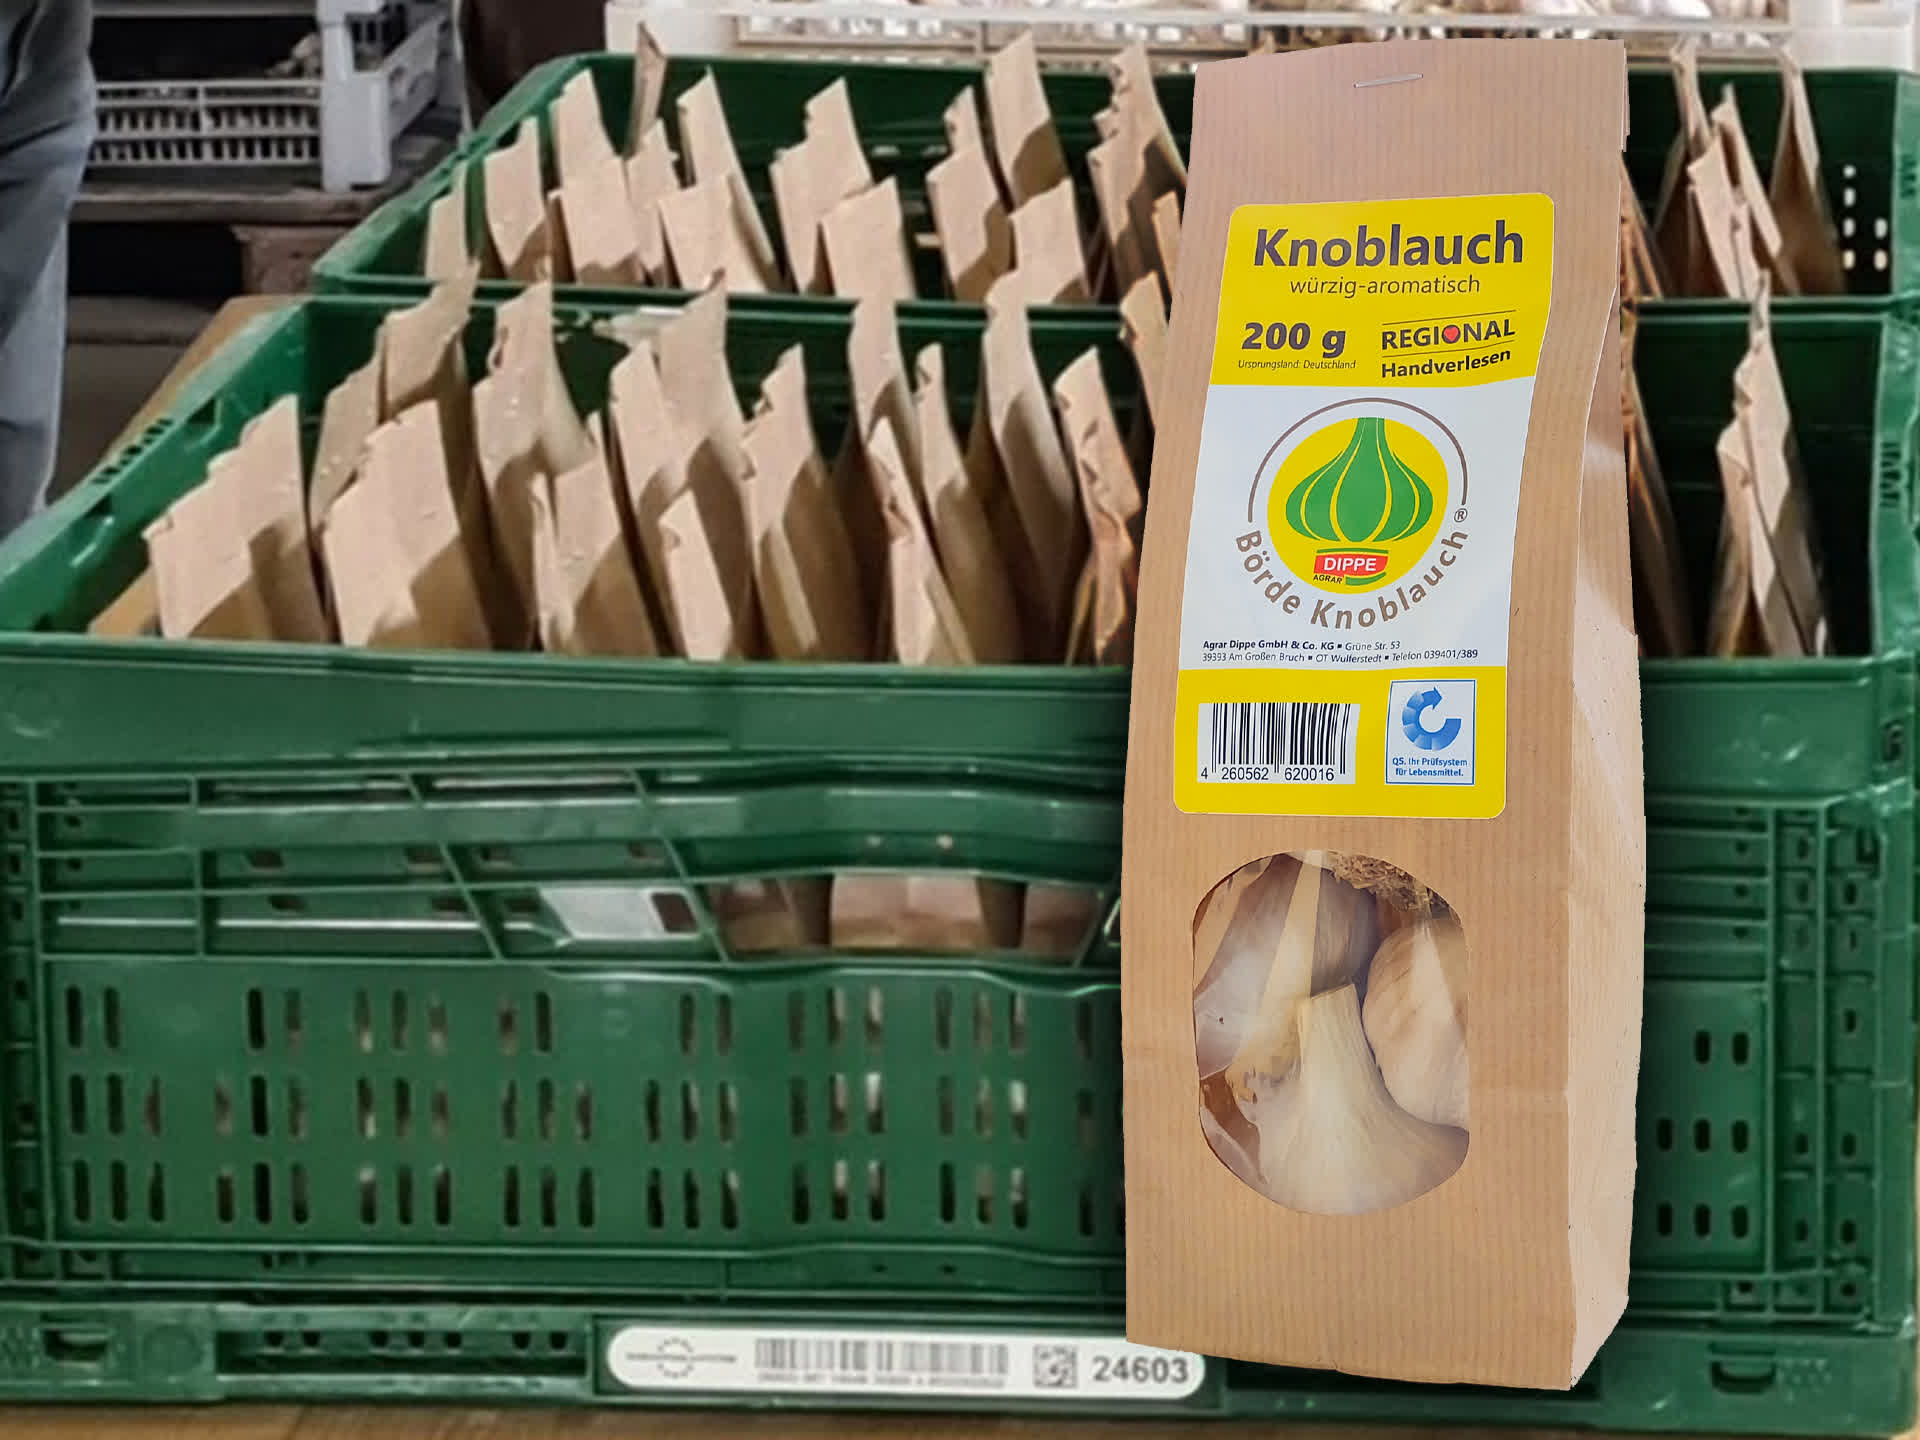 Knoblauch Abpackung